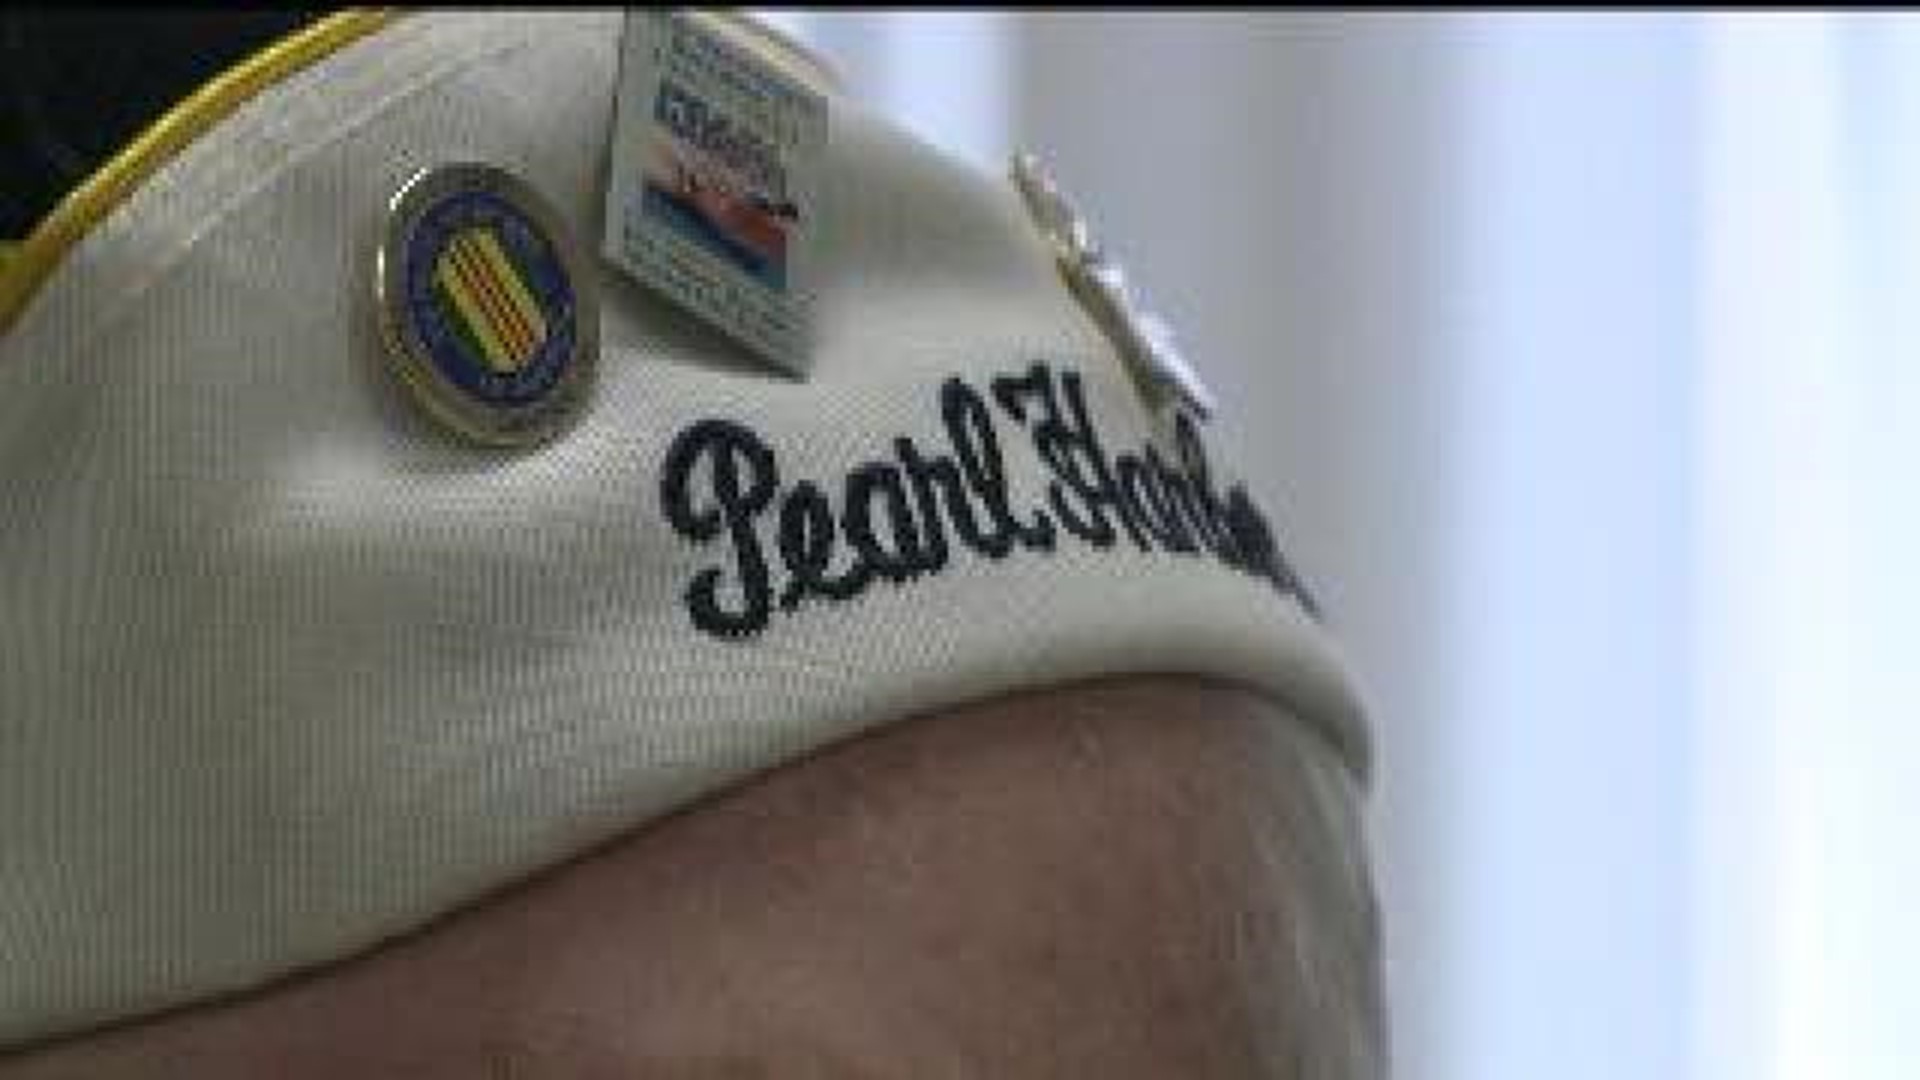 Community Welcomes Home Pearl Harbor Survivors